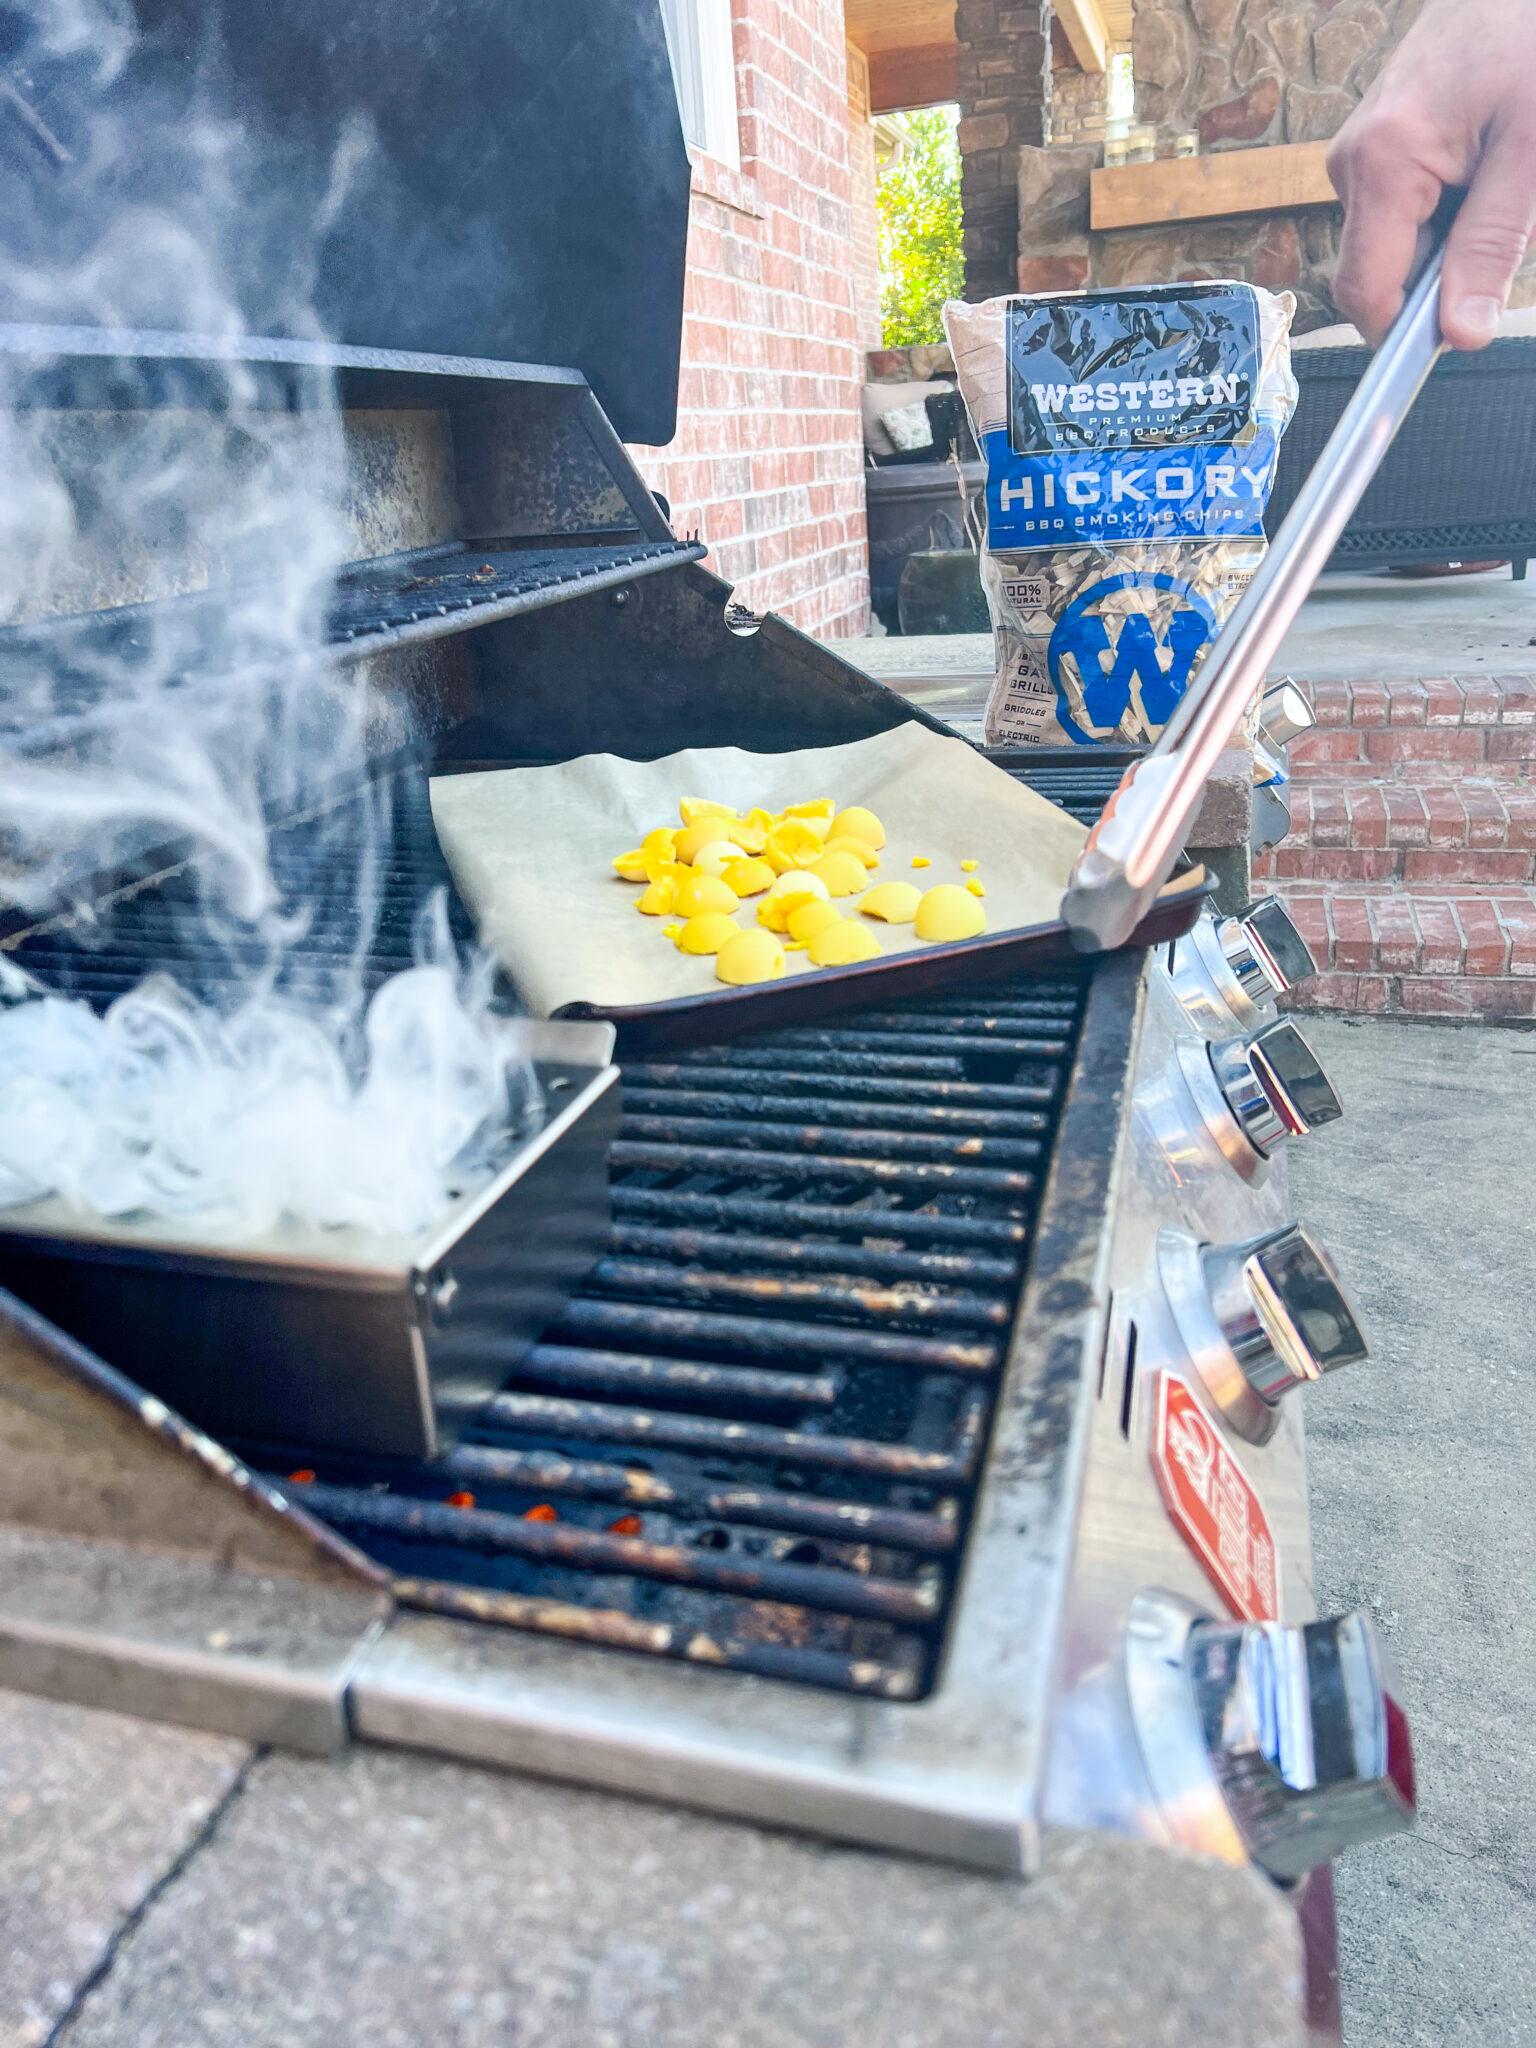 smoking hickory wood chips on a grill and cooked egg yolks on grill with bag of western bbq hickory chips in background